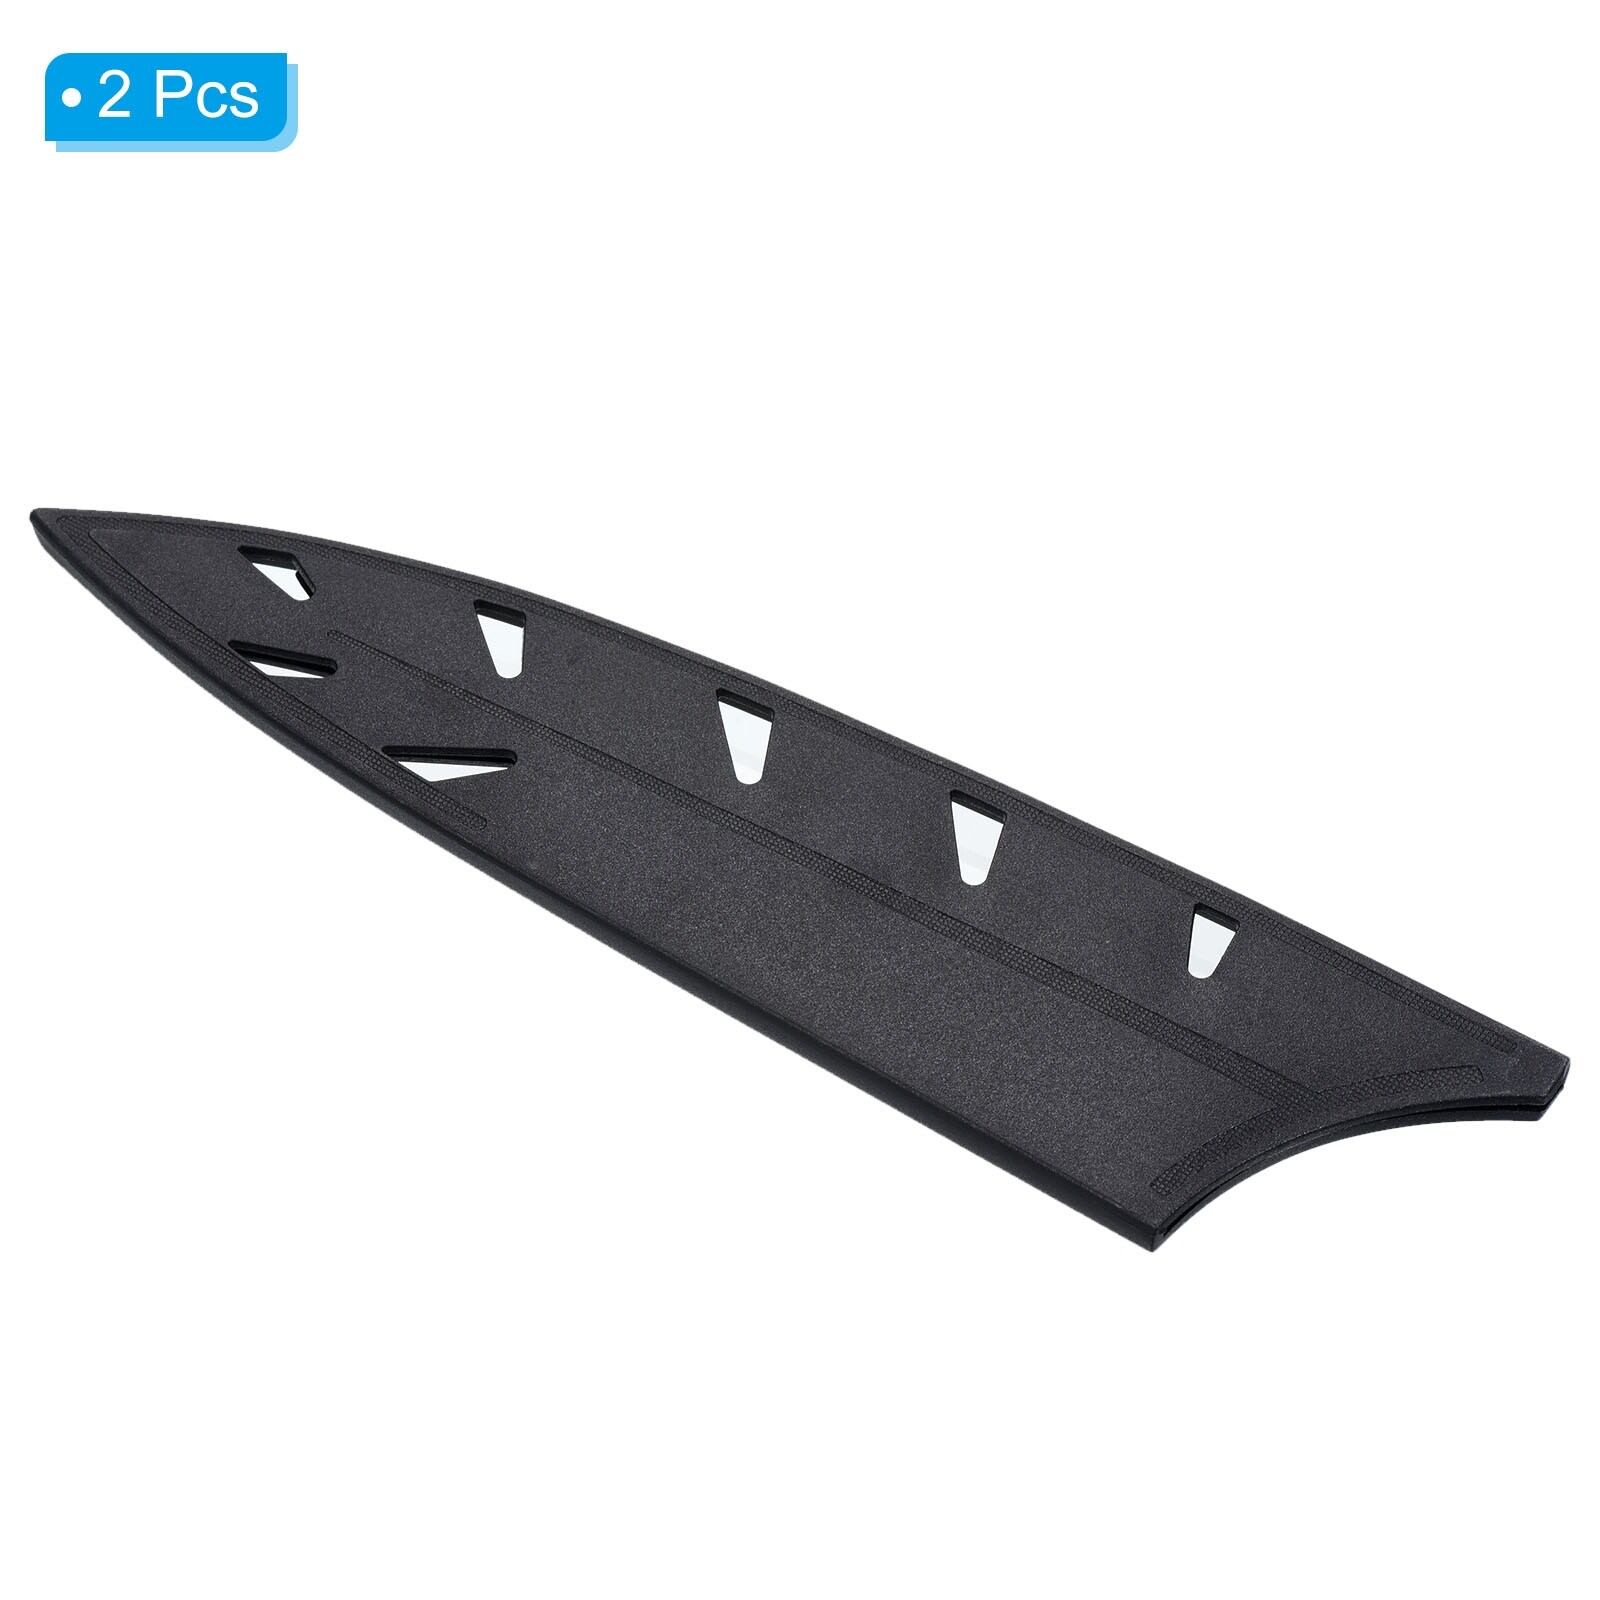 https://ak1.ostkcdn.com/images/products/is/images/direct/beaa60eb2bf71469e568c3077d5f4cfedc9d5cc7/Plastic-Kitchen-Knife-Sheath-Cover-Sleeves-for-8%22-Chef-Knife%2C-Black.jpg